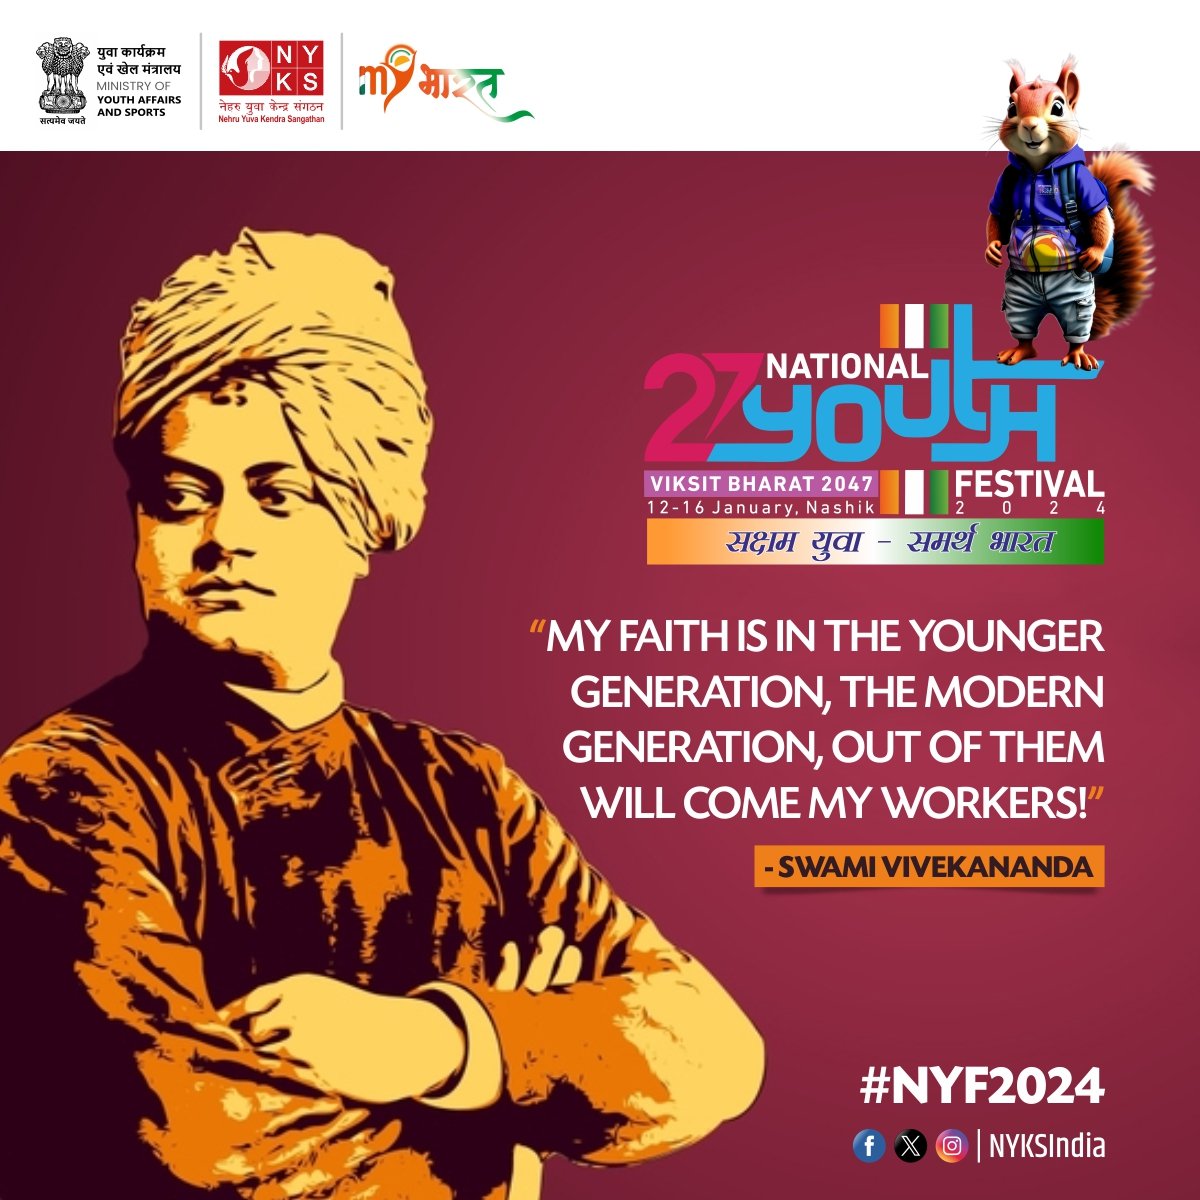 Quote of the Day! 

The youth isn't just the future; they are the architects of change today. Embrace the power of youth – shaping society, one impactful step at a time. 💫🌍 

#YouthImpact #ChangeMakers #NYF2024 #YouthPower #ViksitBharat #MYBharat